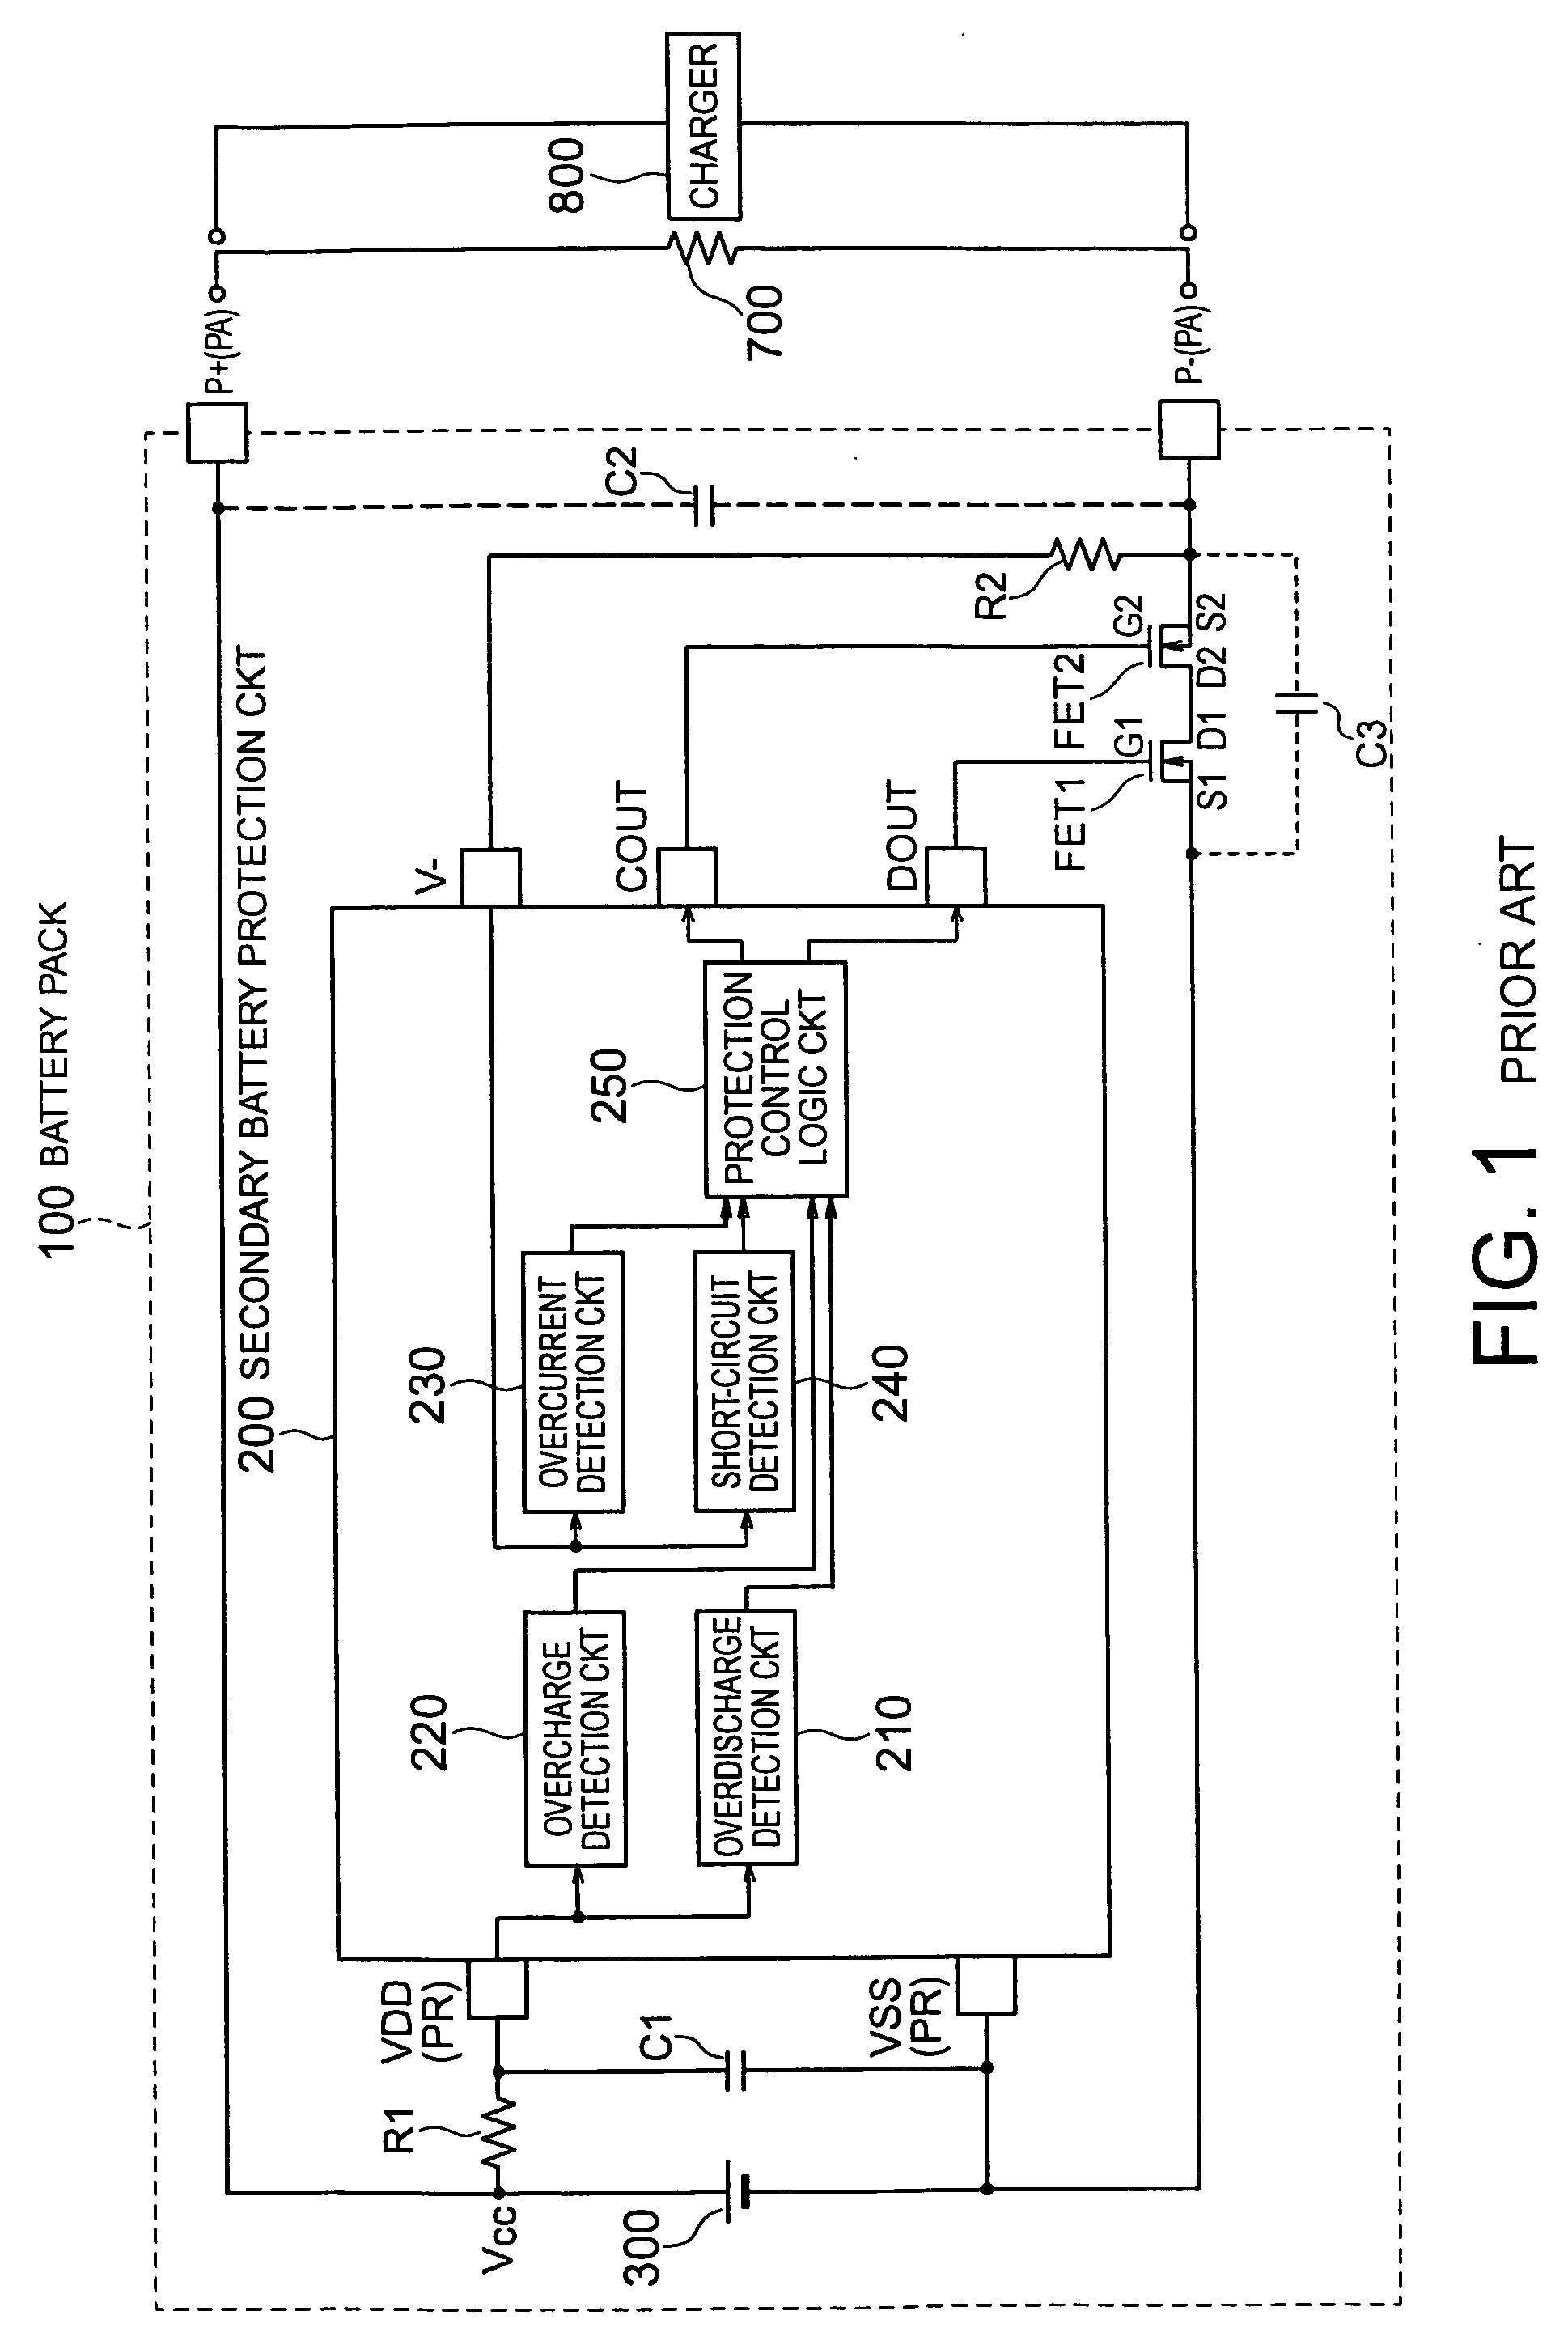 Secondary battery protection circuit comprising a security arrangement